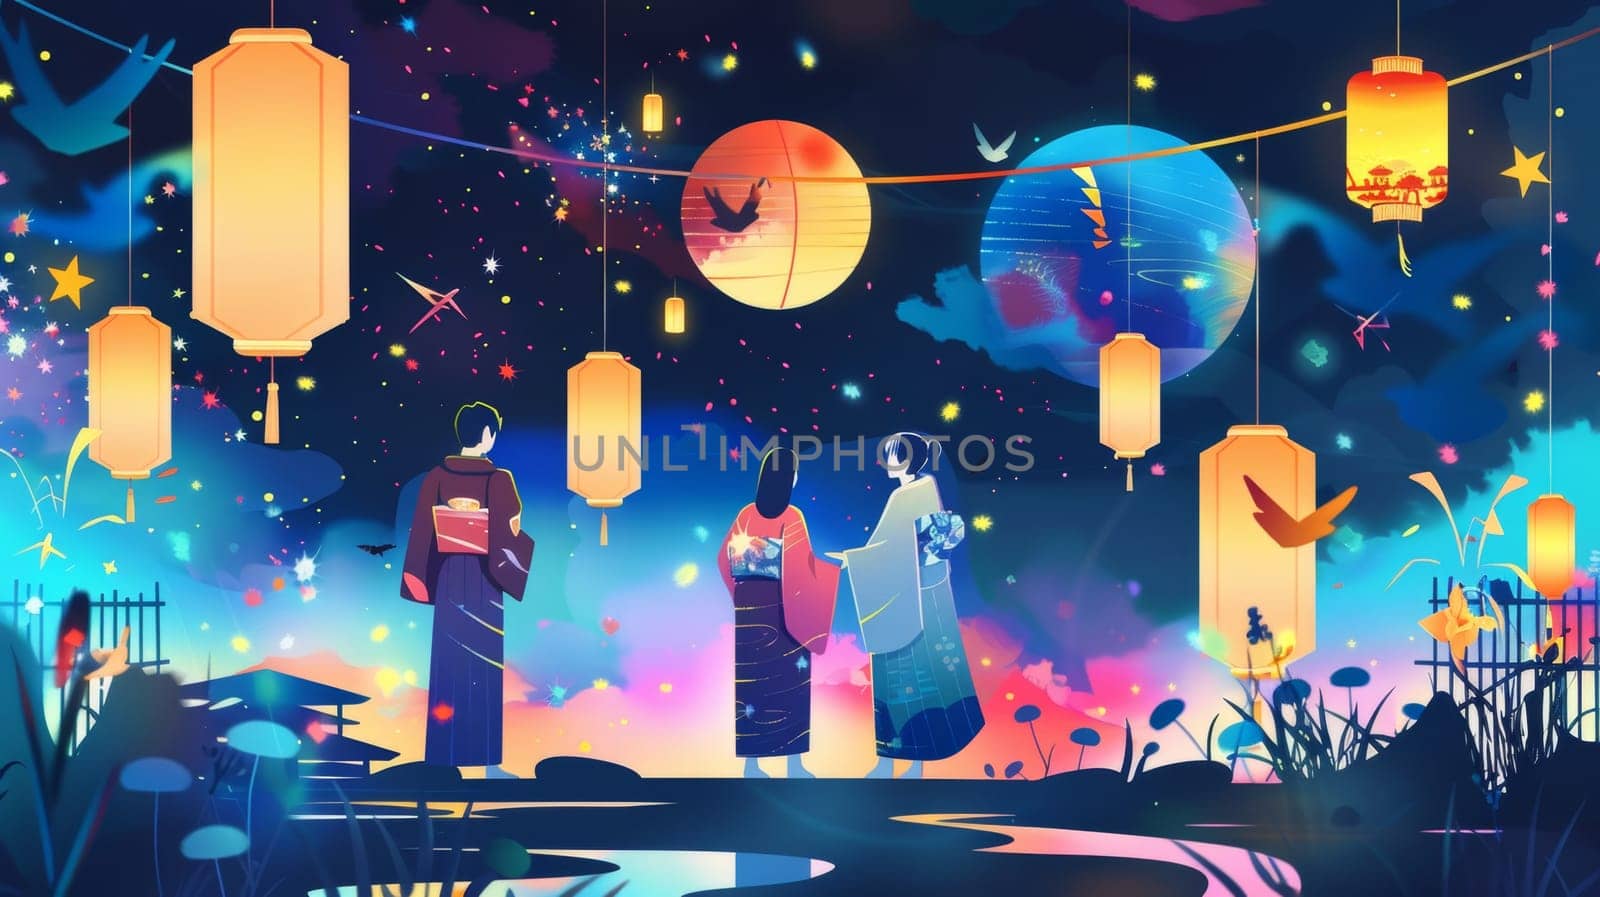 A vivid Tanabata night scene captured with colorful paper lanterns hanging amidst bamboo leaves, sparkling against a starry background in a festive display